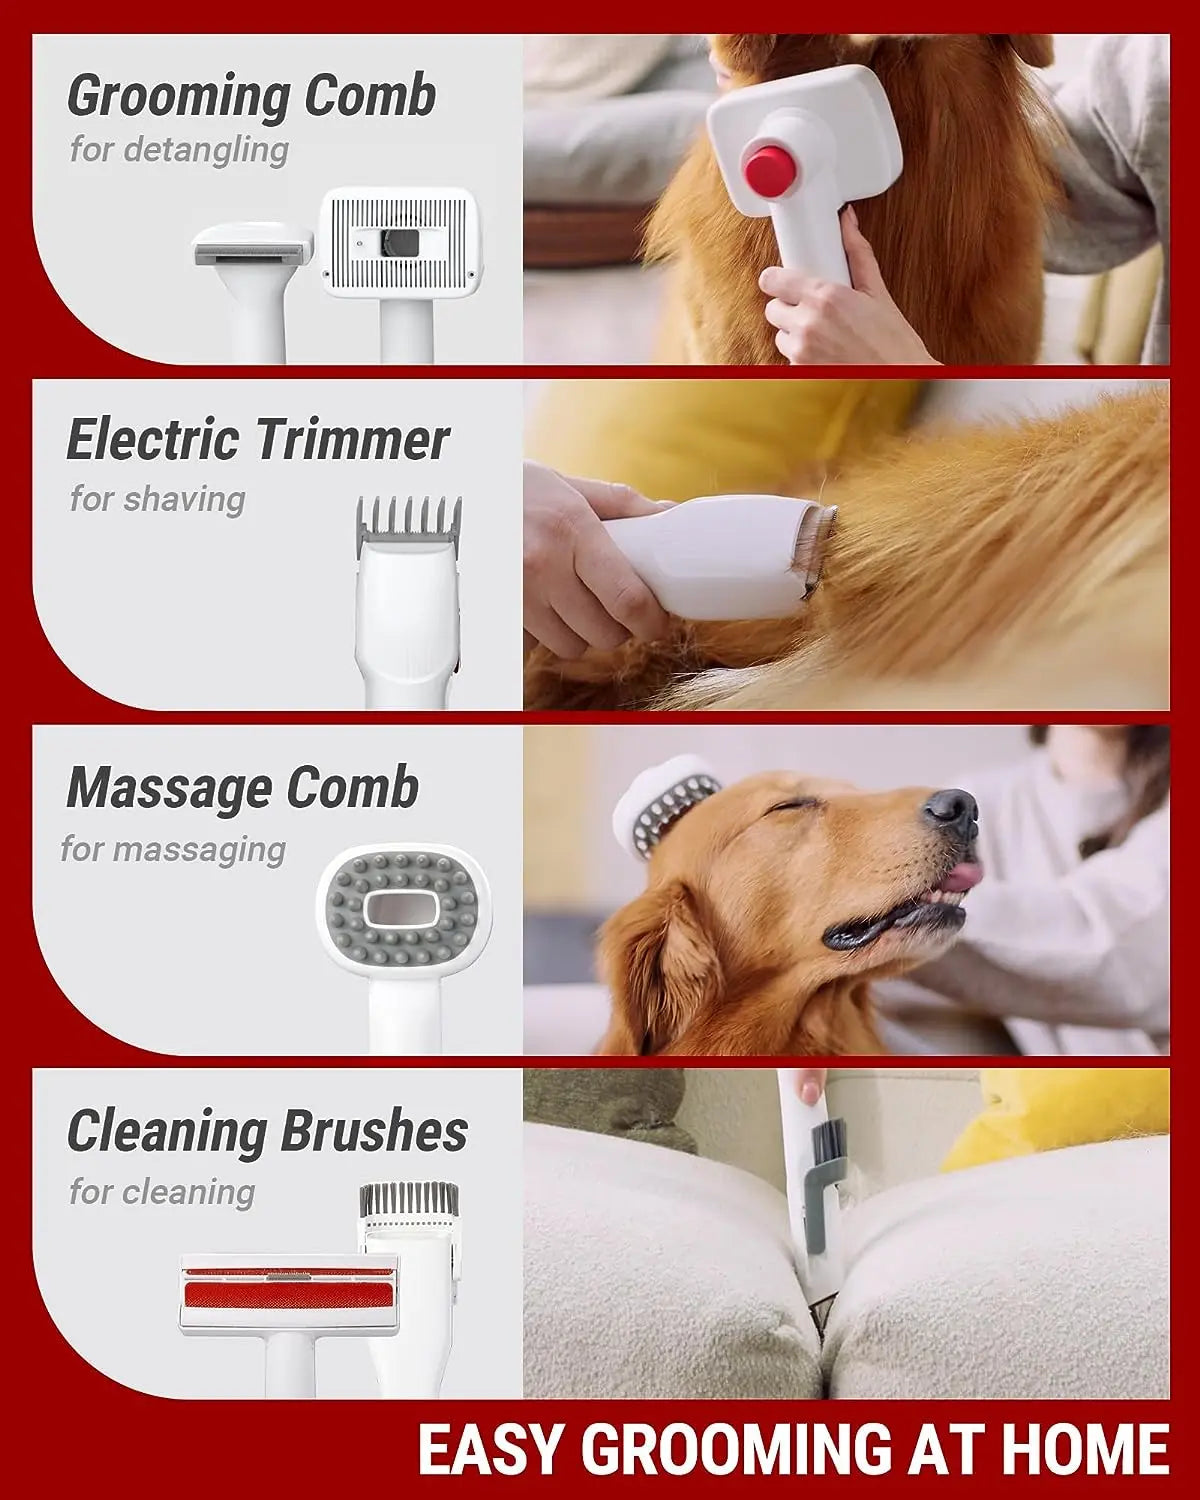 VacLife Pet Hair Vacuum For Shedding Grooming With Dog Clipper - Multipurpose Dog Grooming Kit With Brushes And Other Grooming Tools For Dogs And Cats - Low-Noise - White And Red - Image #7